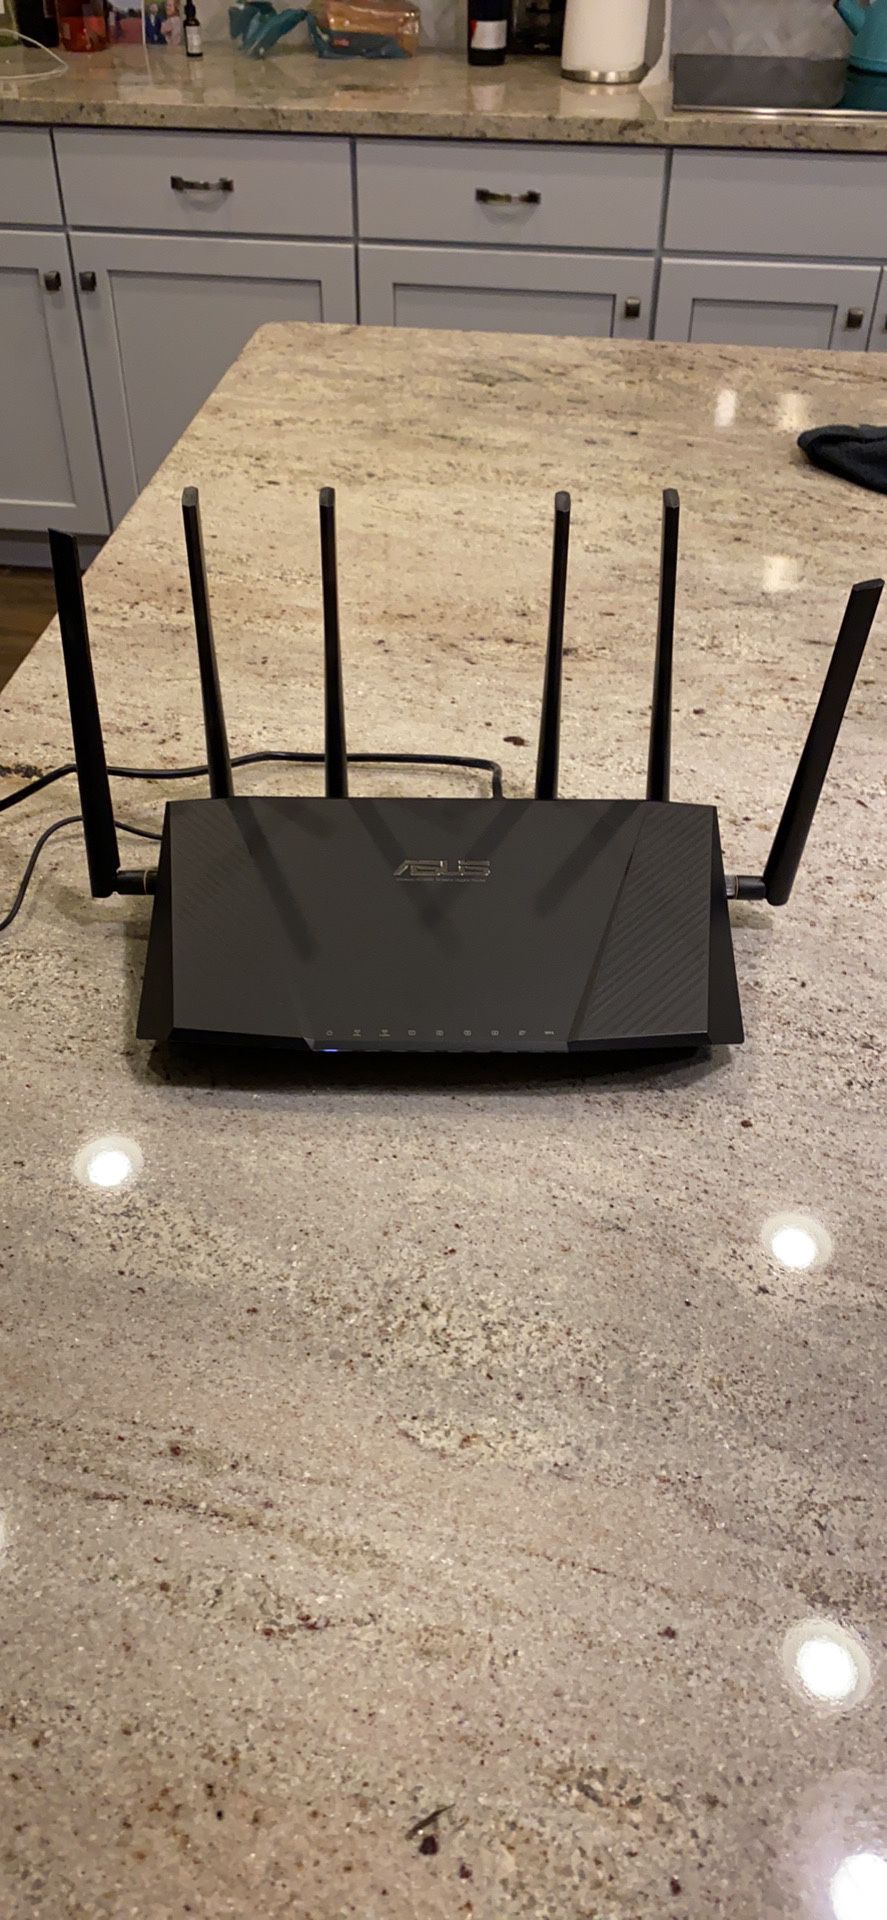 ASUS Wireless AC3200 Tri-Band Gigabit router